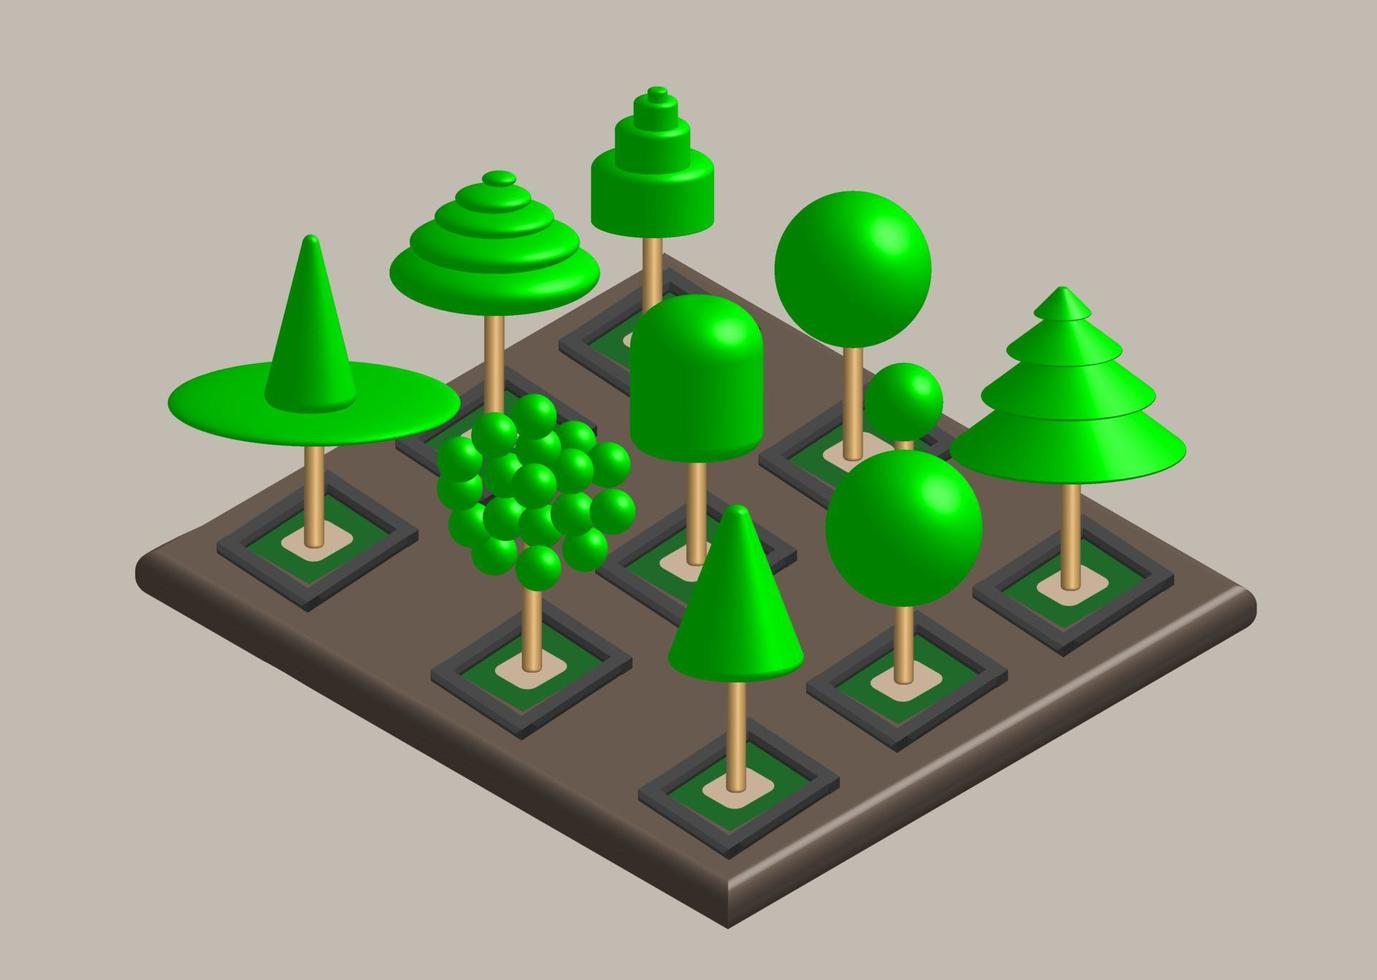 set of tree isometric designs with various shapes, realistic 3d vector illustration